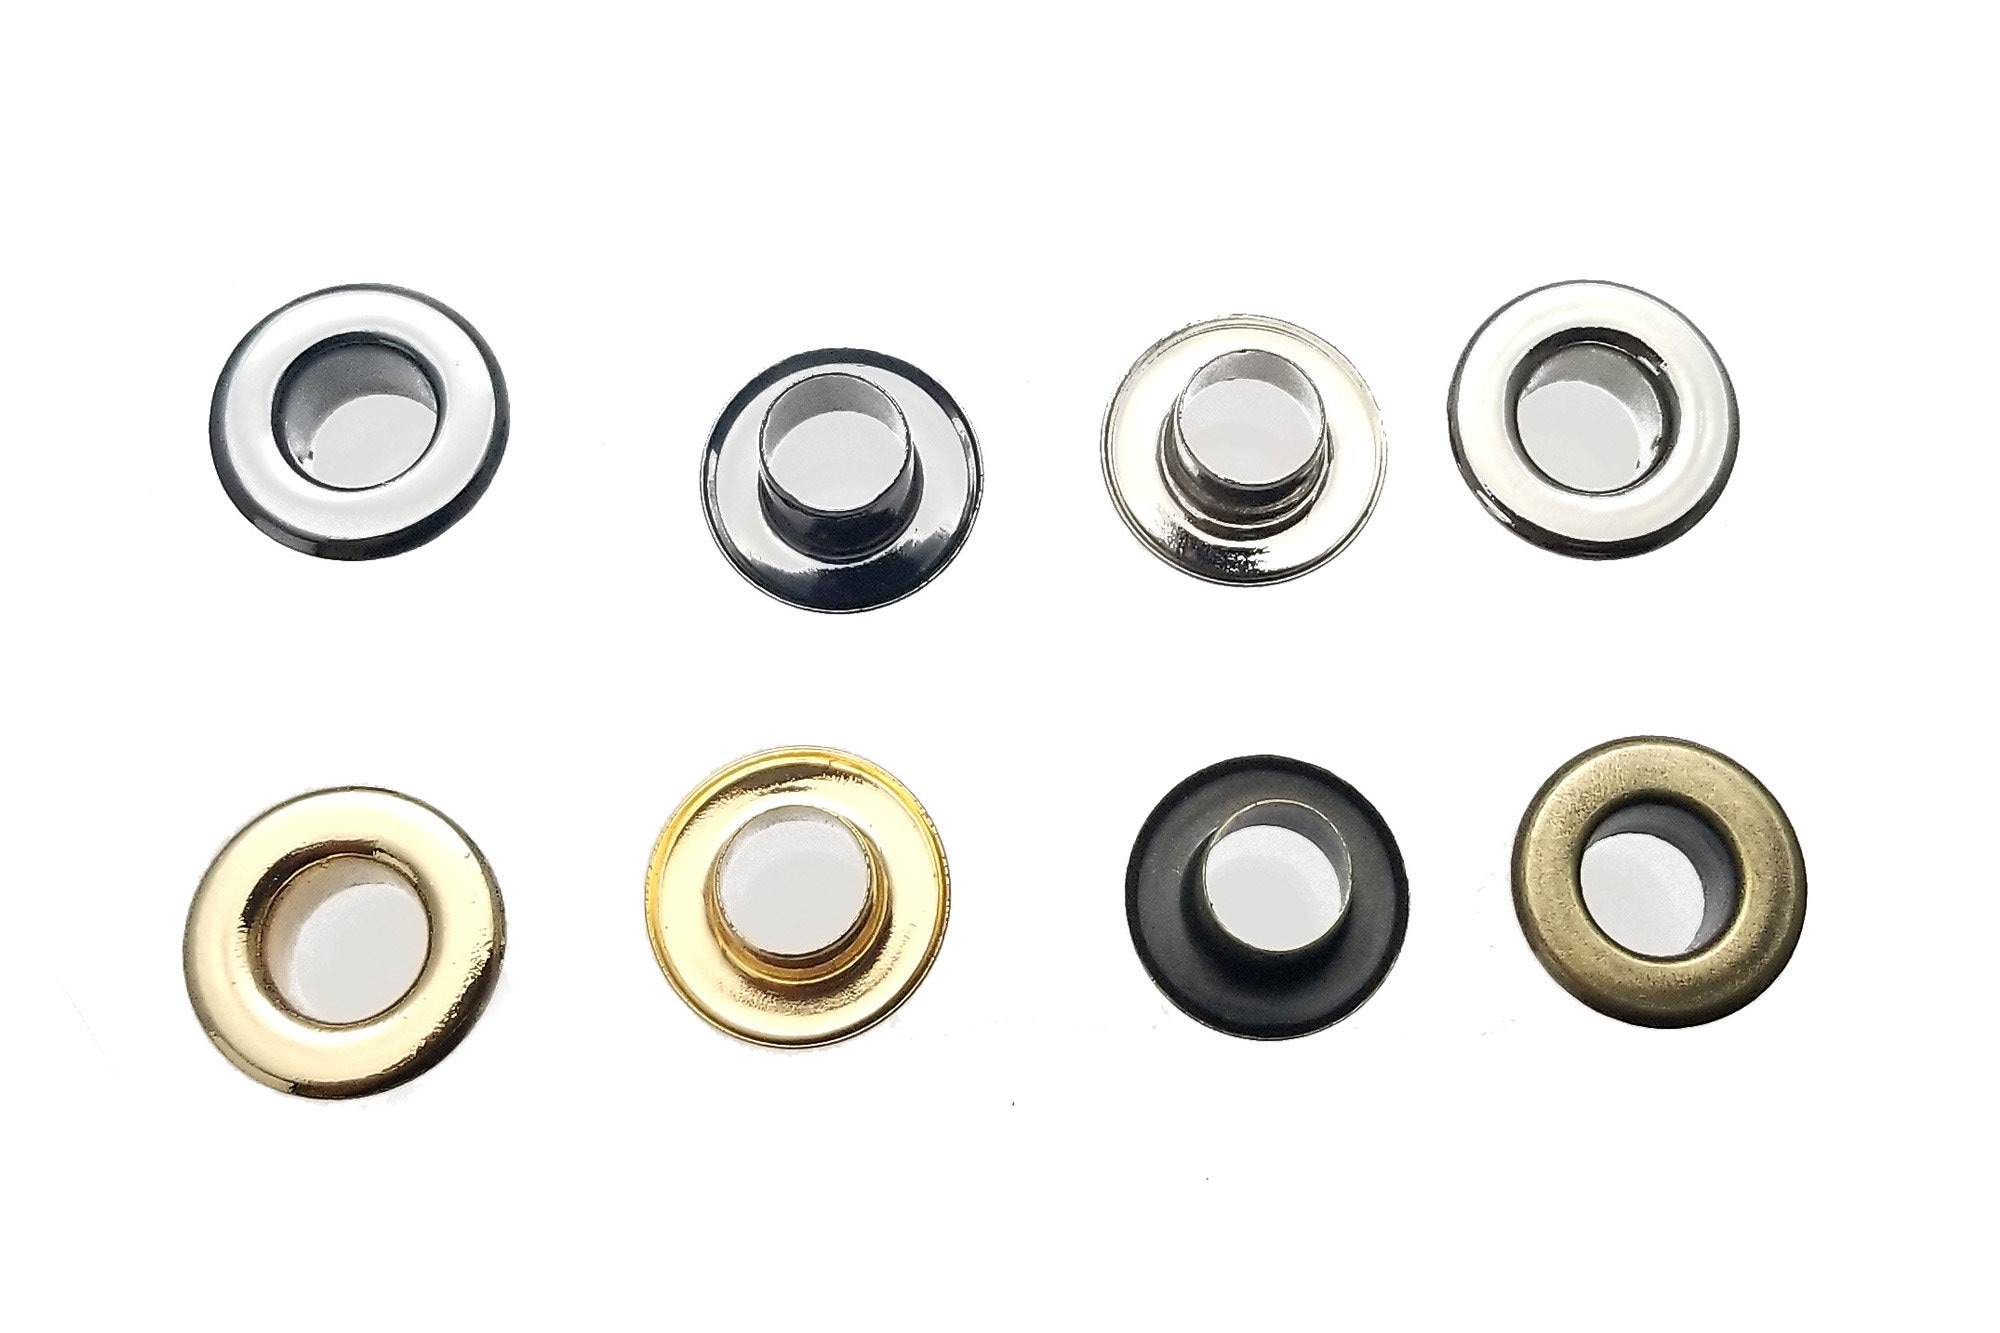 25 Sets Grommets Kit Metal Eyelets with Washers Curtain Grommet for  Leather, Tarp, Canvas (Silver,1 Inch)